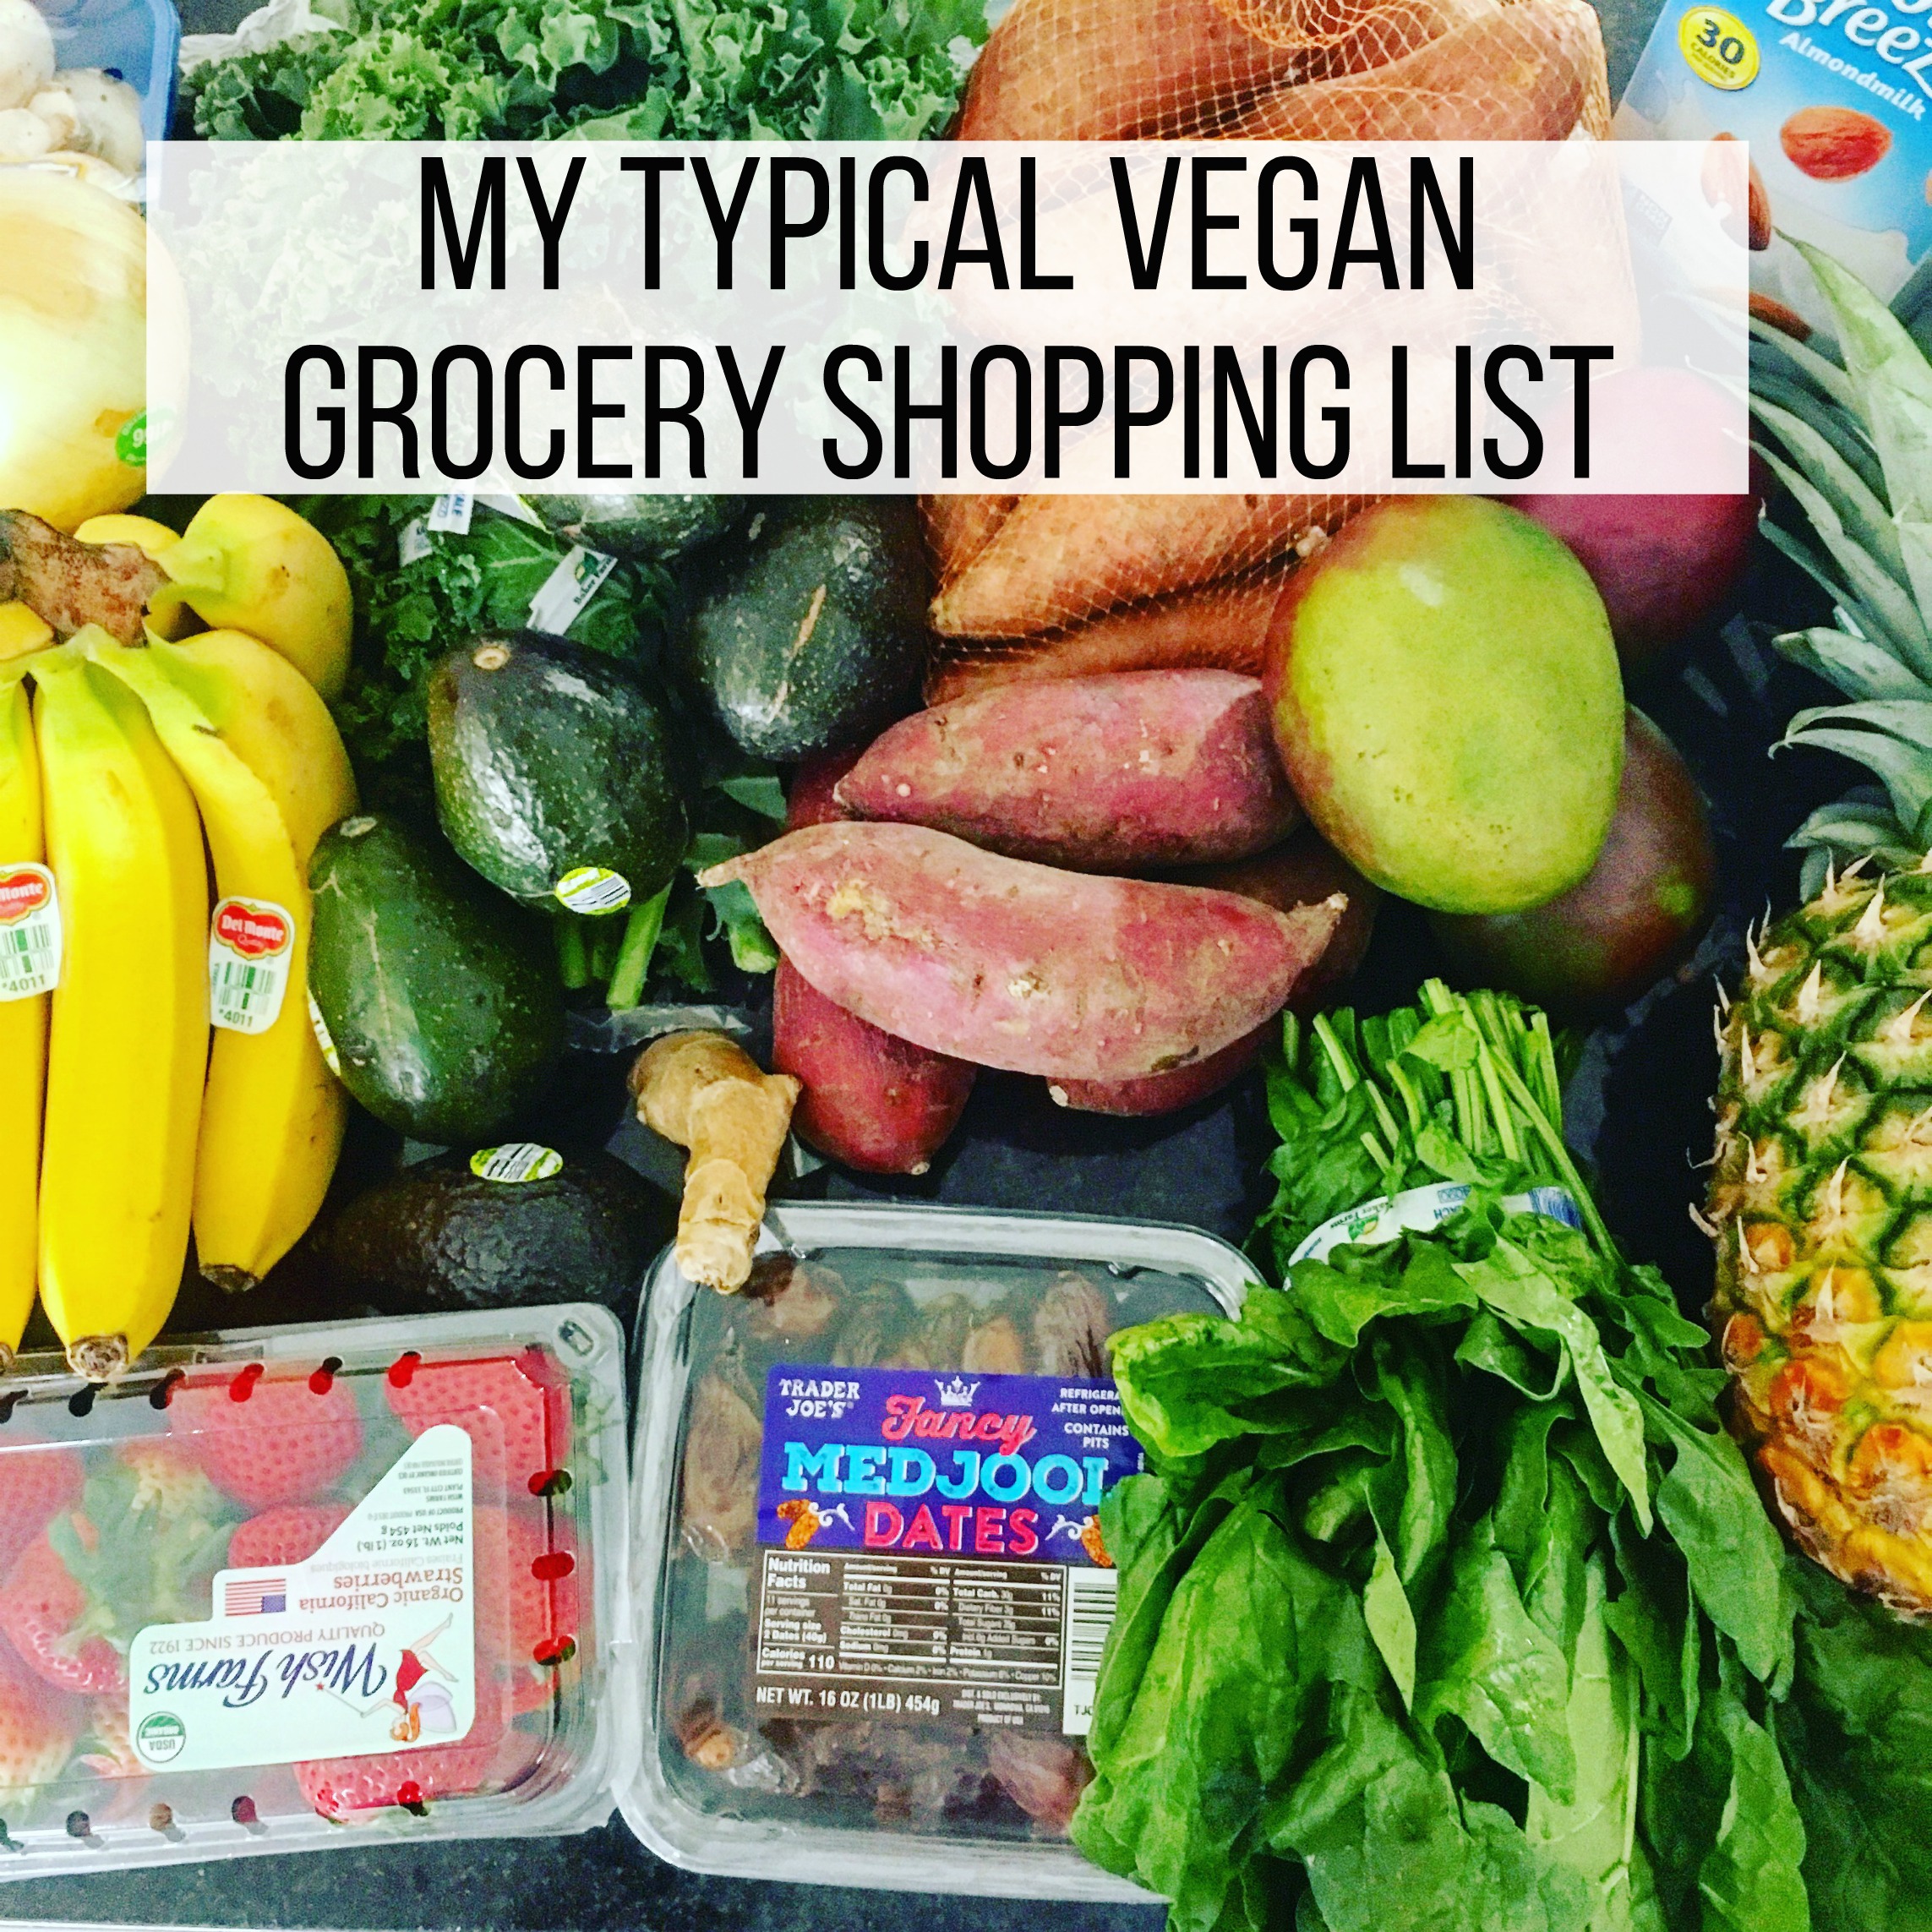 My Typical Vegan Grocery Shopping List